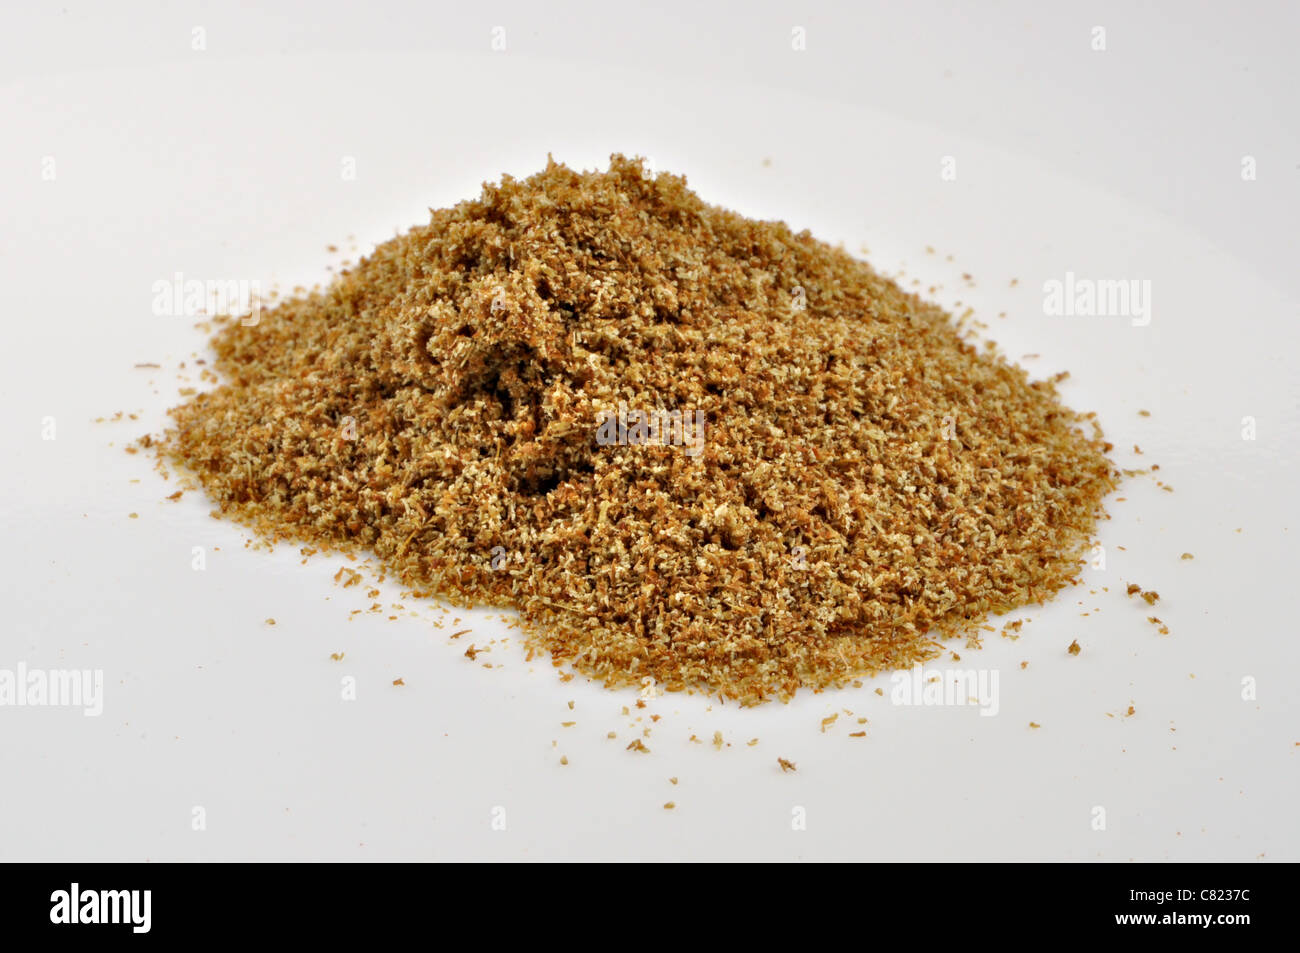 A small pile of ground cumin sits on a plain white background. Stock Photo